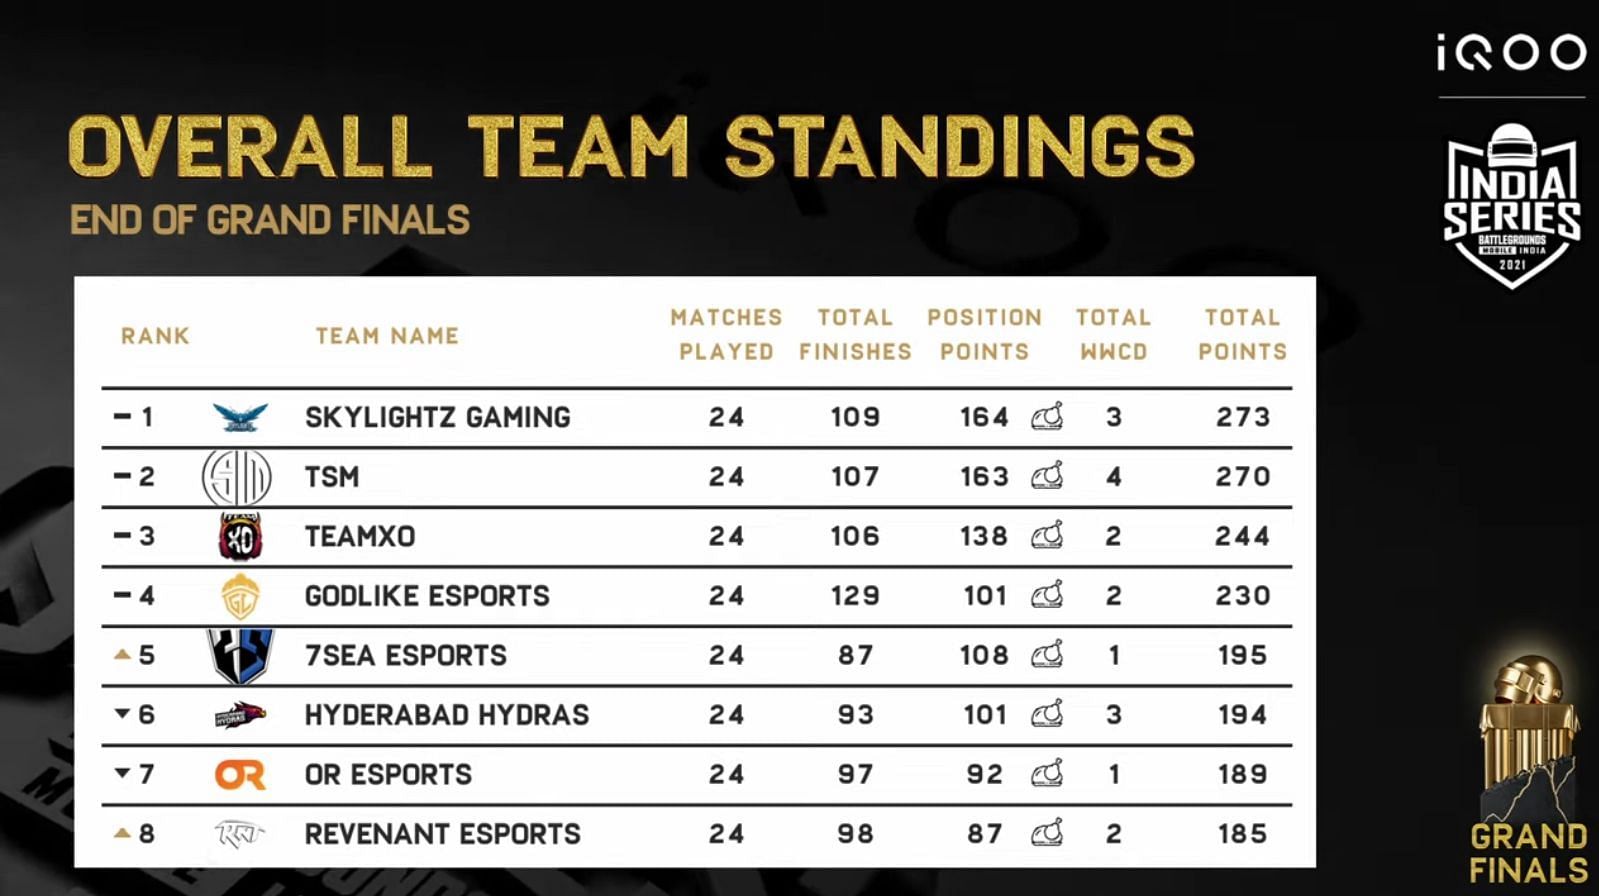 GodLike Esports notched fourth place in the Grand Finals